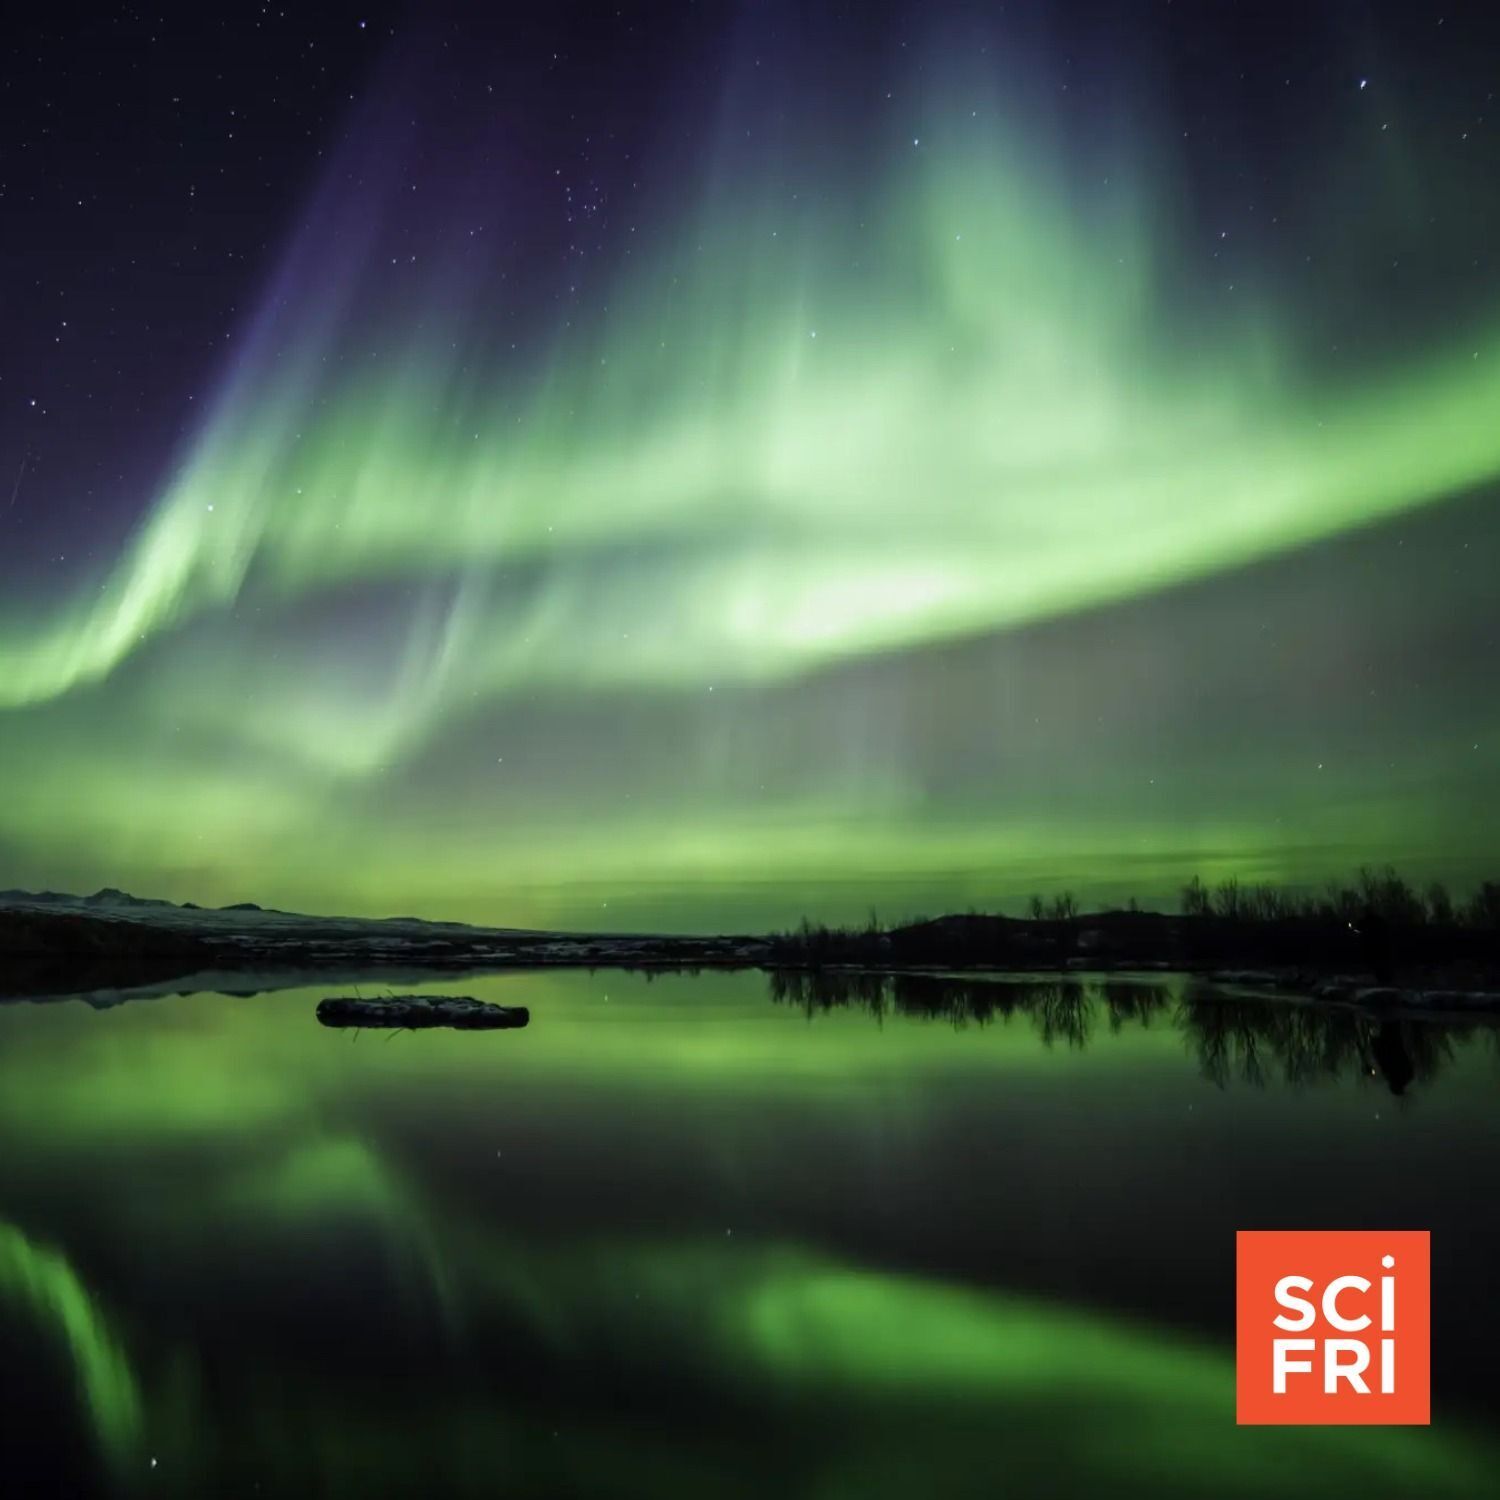 663: Surfing Particles Can Supercharge Northern Lights